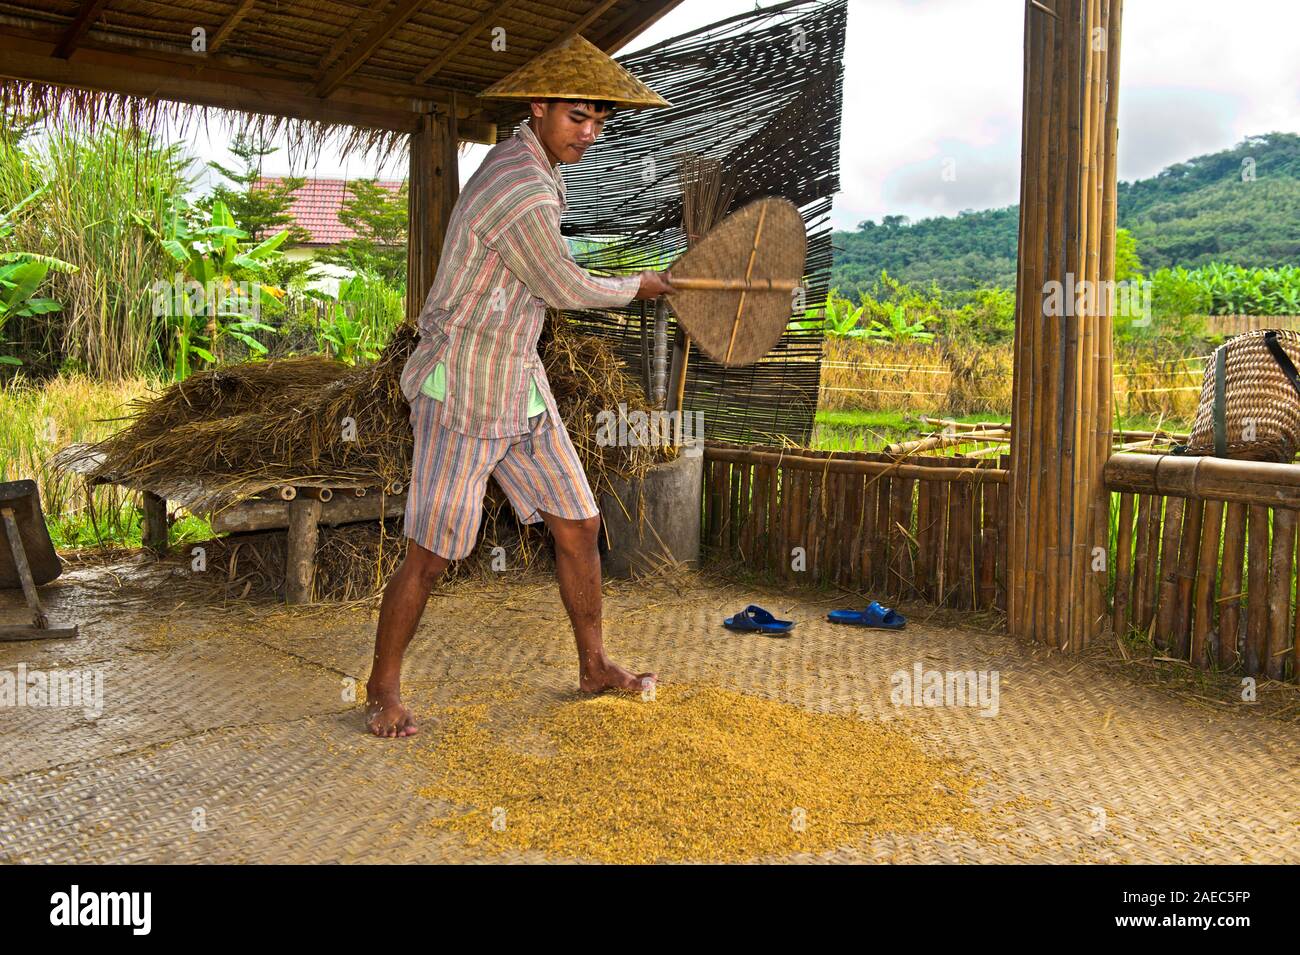 Farmer separating the rice from the chaff with a hand fan, traditional rice producing technology, Living Land Ricew Farm,Luang Prabang, Laos Stock Photo